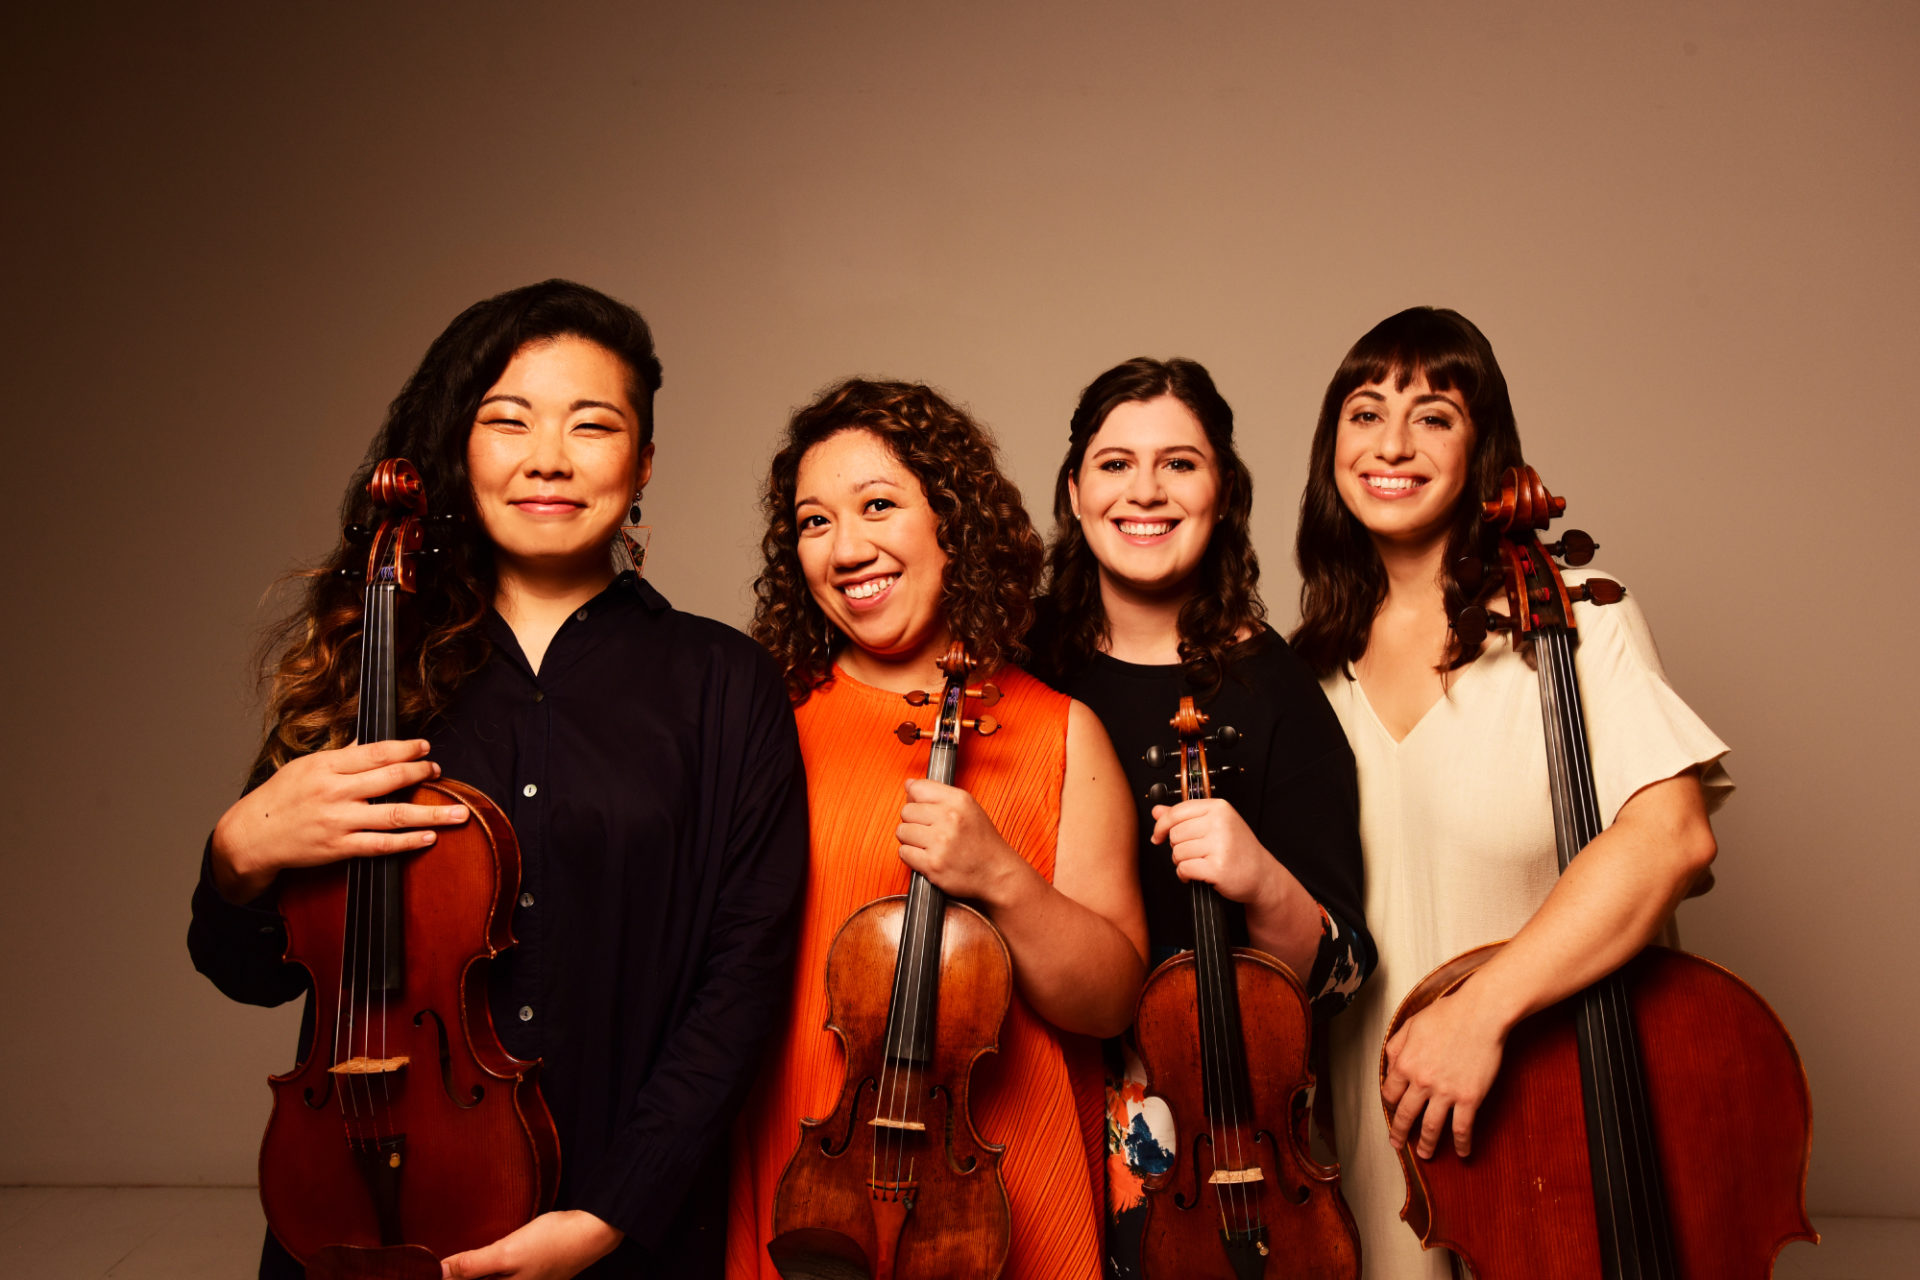 Four women are pictured with their string instruments. The background is a neutral brown and beige.